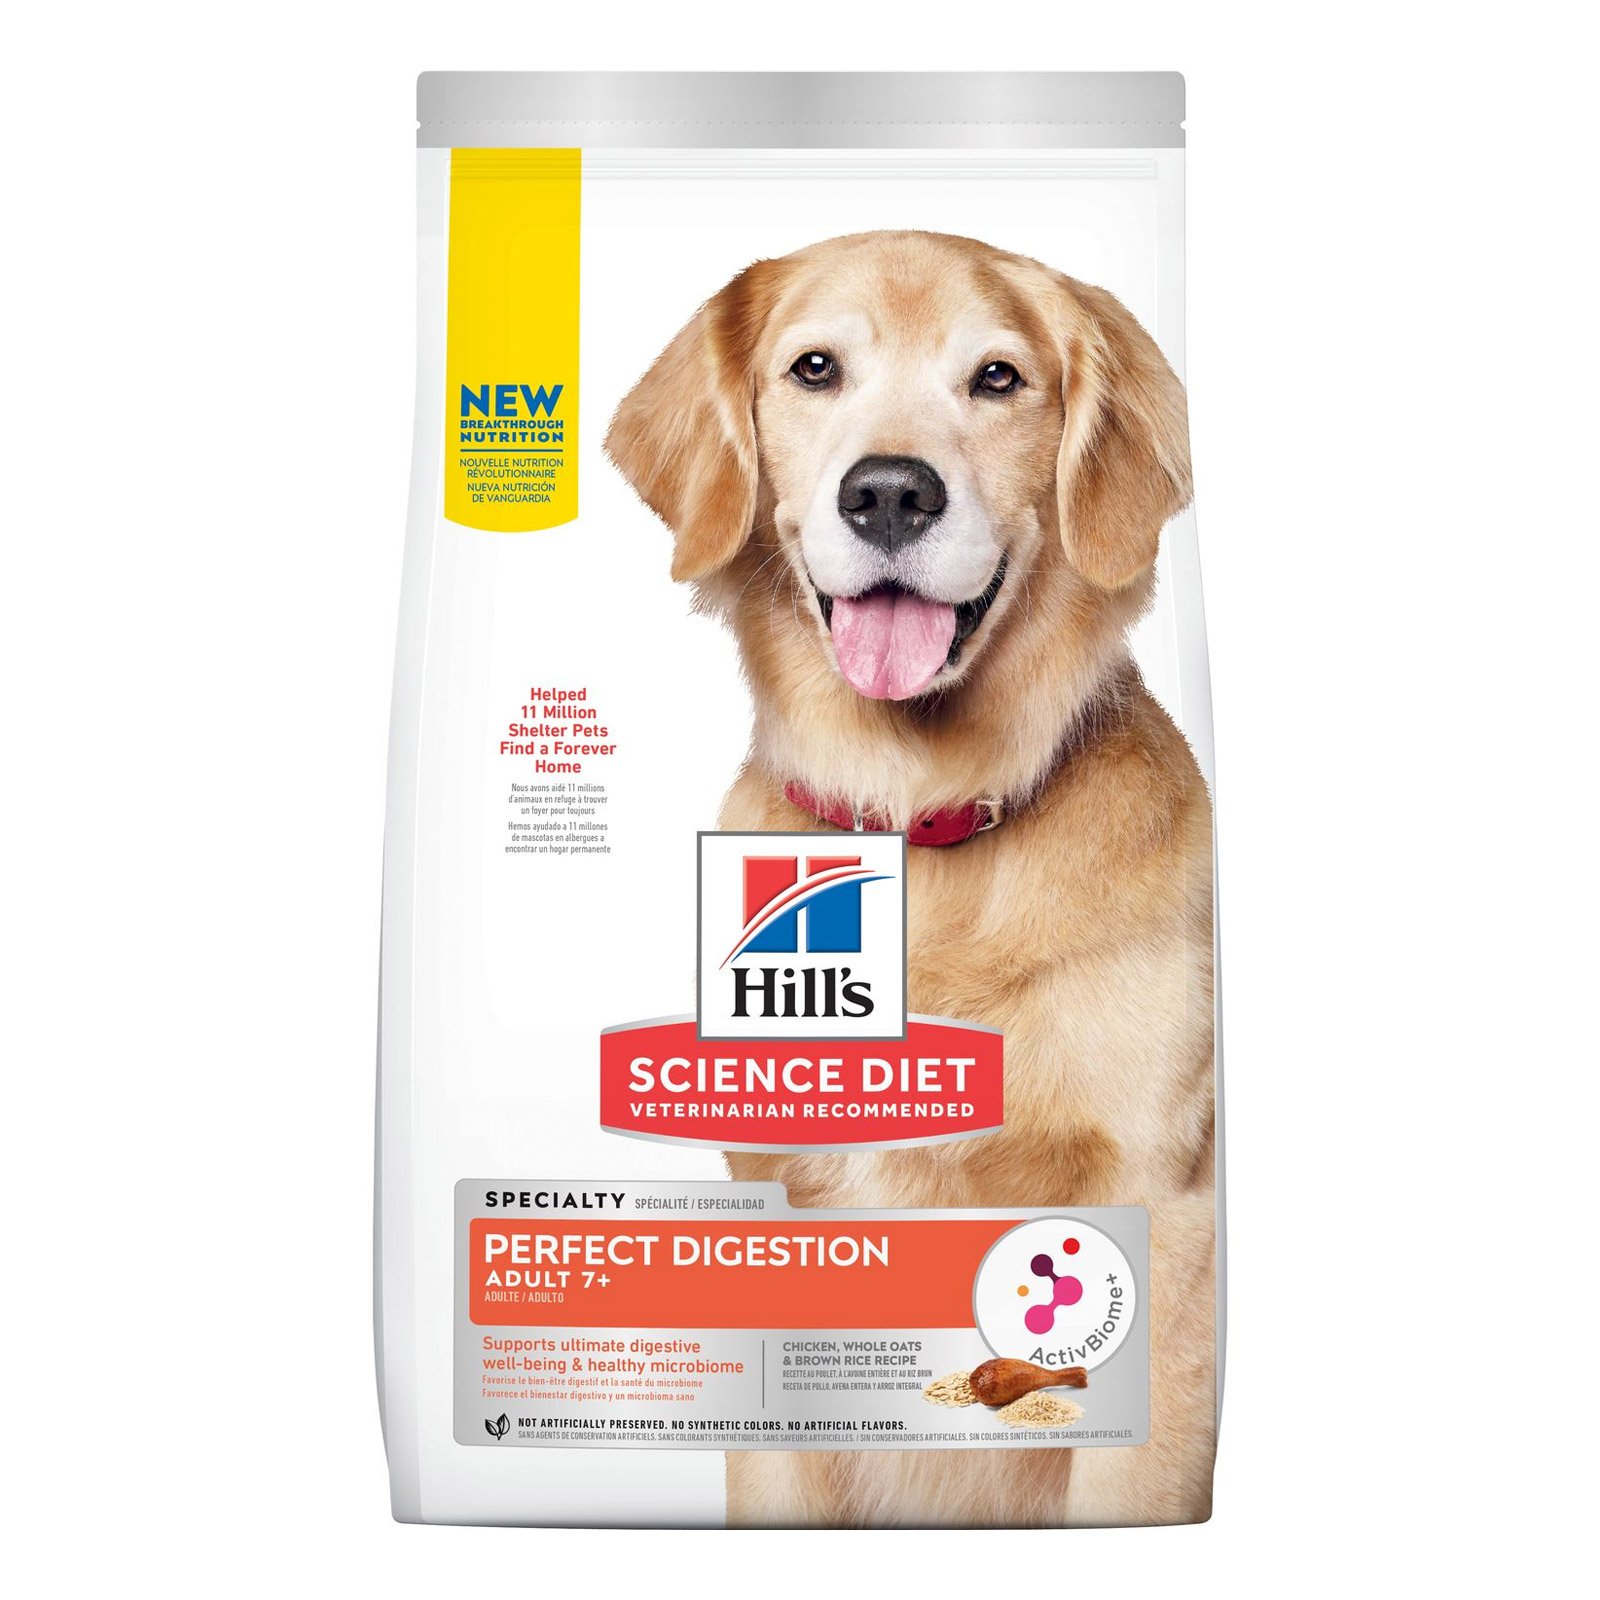 Hill’s Science Diet Adult 7+ Perfect Digestion Dog Food 5.44 Kg